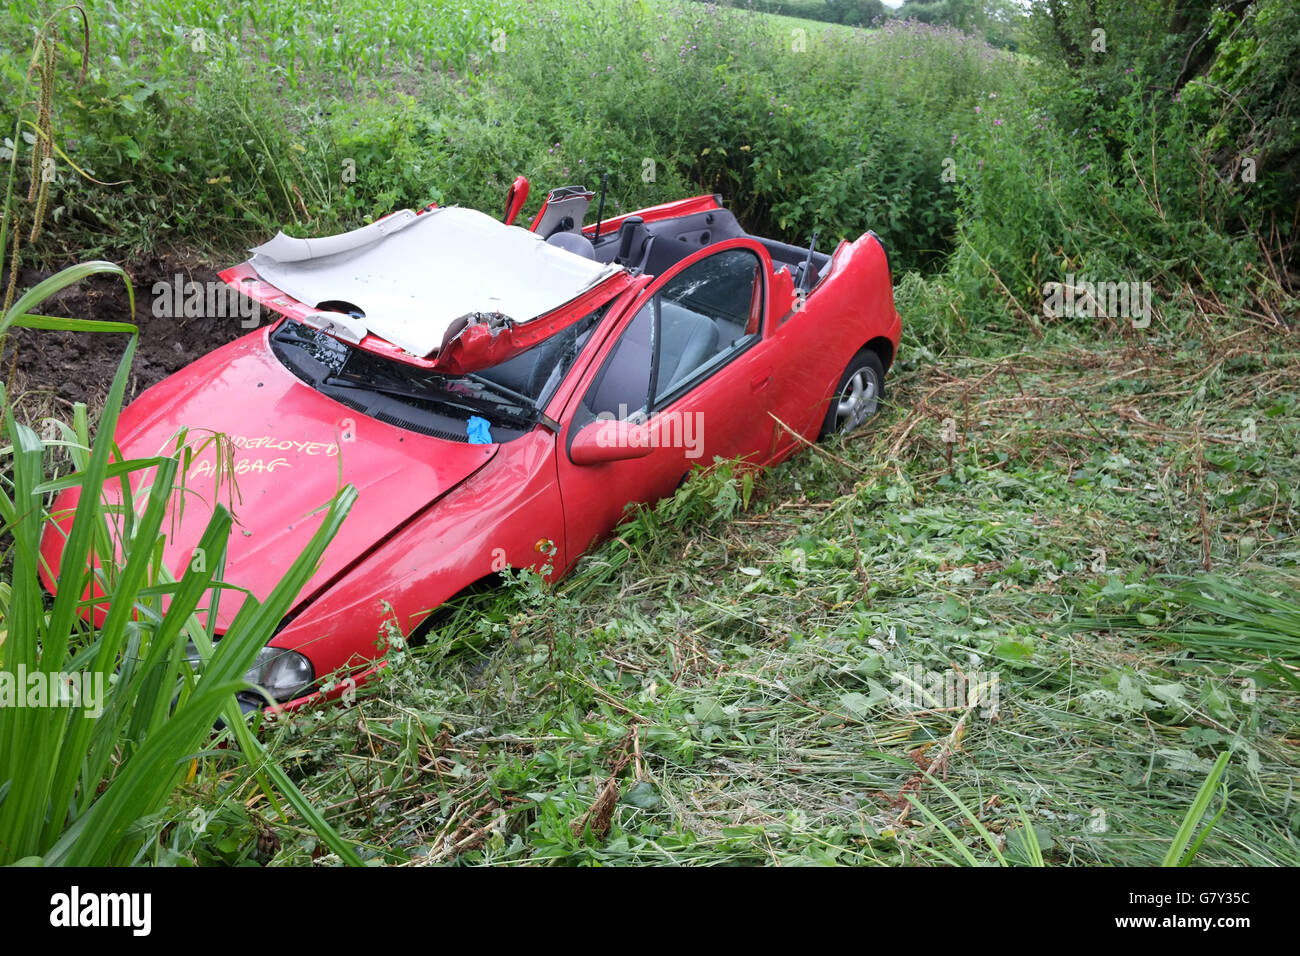 West Rolstone Road, Somerset, UK. 27th June, 2016. Vauxhall - Opel Tigra crashed into a ditch in rural Somerset, with the roof cut off be emergency services to rescue the driver. West Rolstone Road, Somerset Credit:  Timothy Large/Alamy Live News Stock Photo